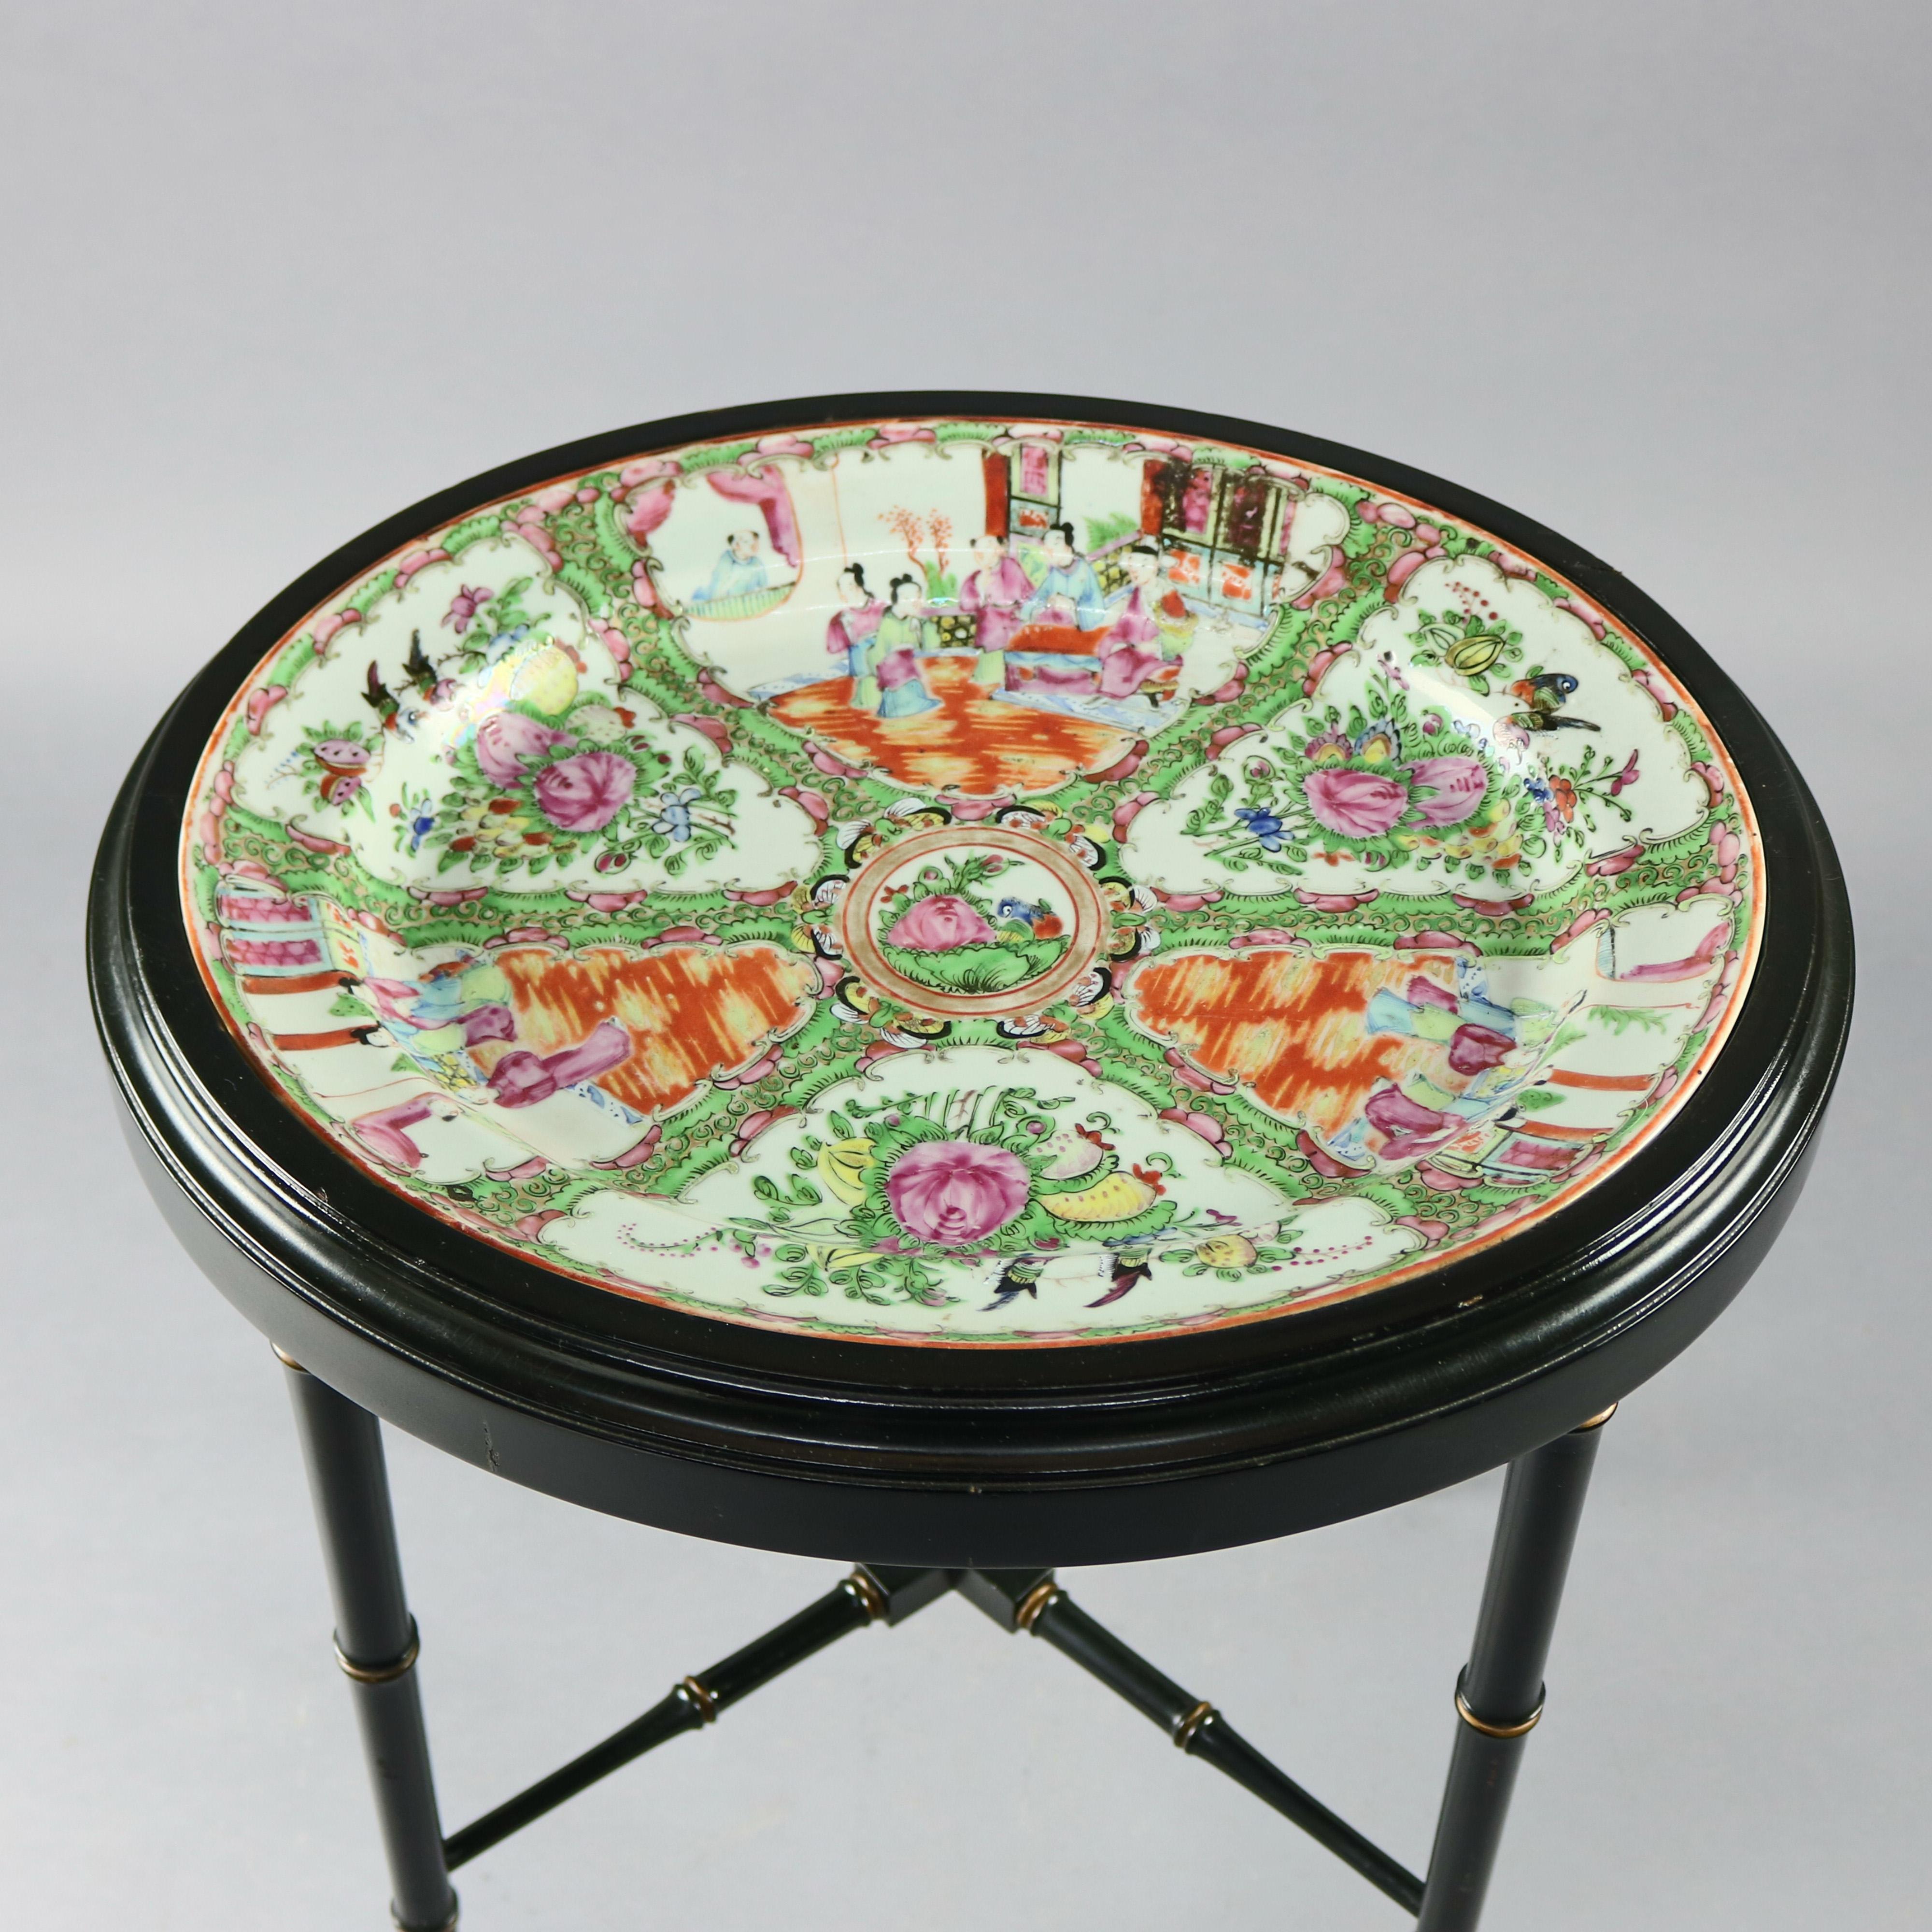 Vintage Chinese tea table offers removable hand enameled porcelain tray with reserves having garden and interior scenes with figures seated in ebonized stand with bamboo form legs and gilt highlights, circa 1940

Measures - 18.75